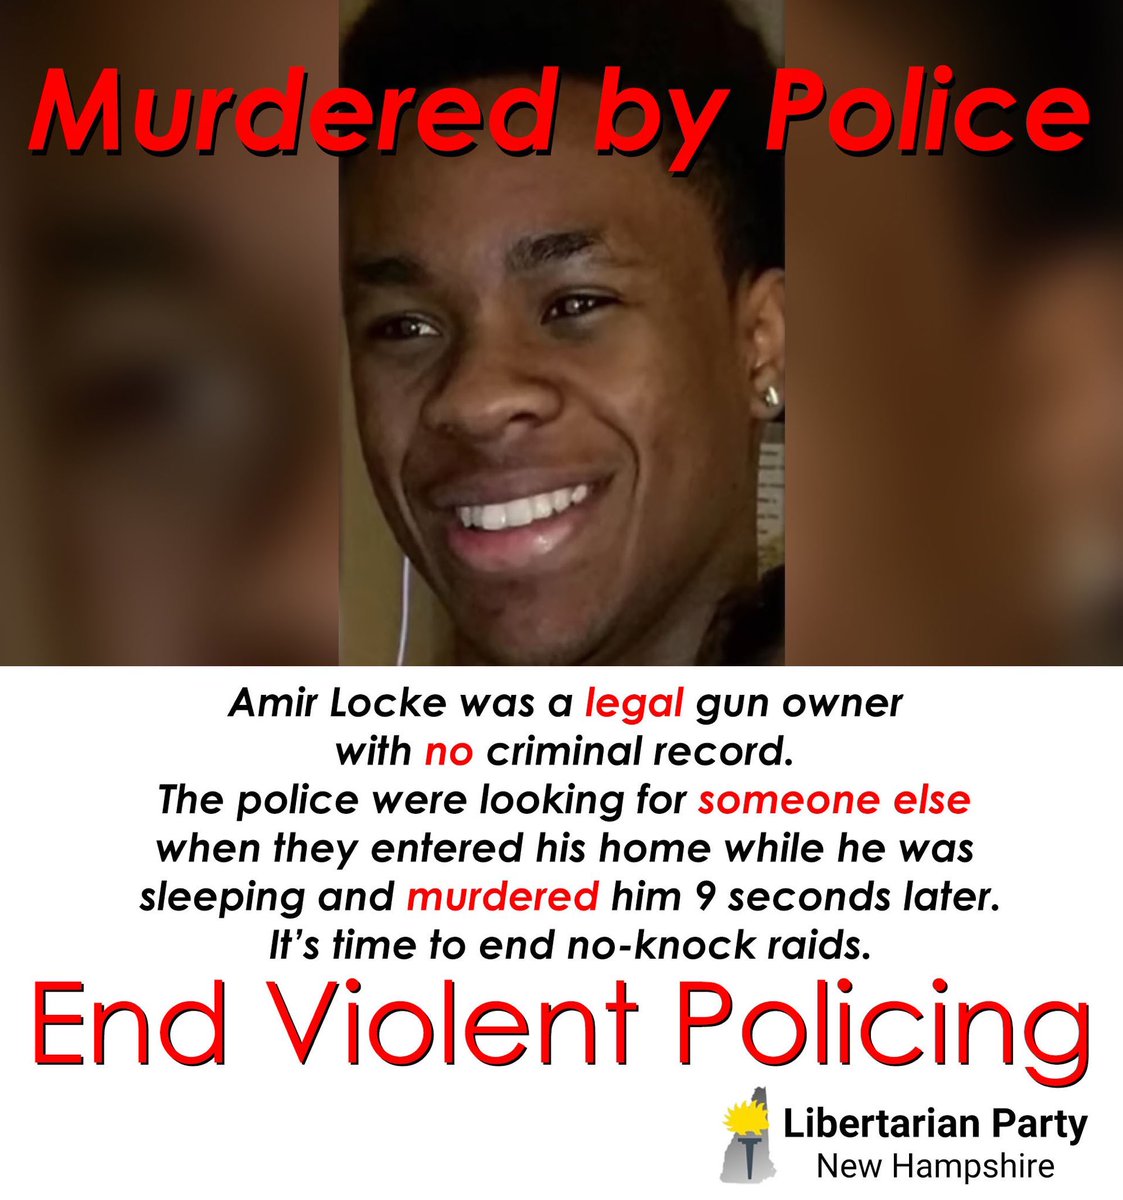 Amir Locke was murdered by the police. 

The killer cops and those who ordered the raid must be held accountable!

#EndQualifiedImmunity 
#EndNoKnockRaids 
#BadgesDontGrantExtraRights 
#JusticeForAmir